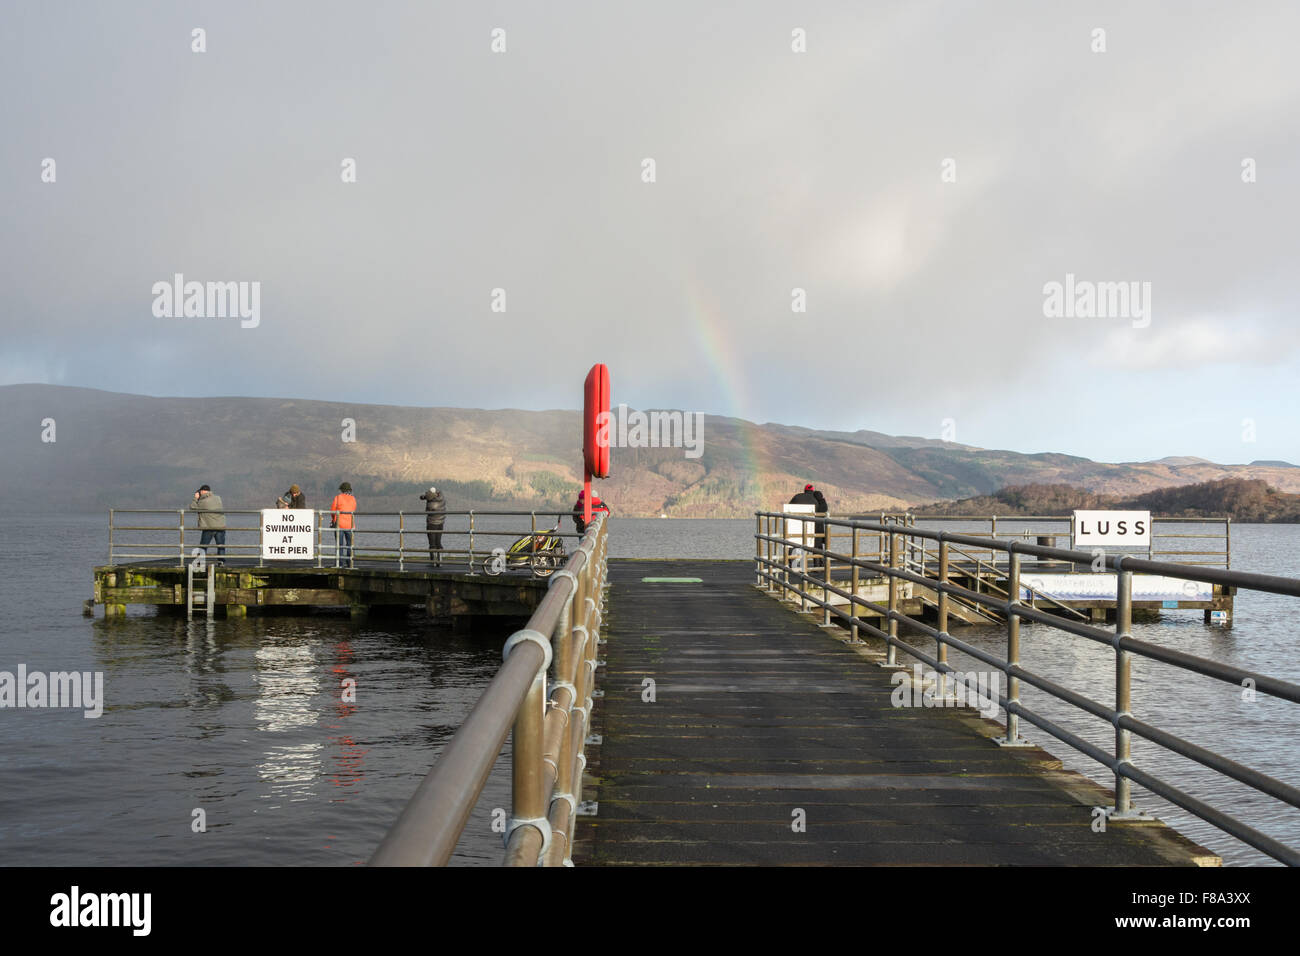 High water and rainbow at Luss Pier, Loch Lomond after unusually heavy rains Stock Photo